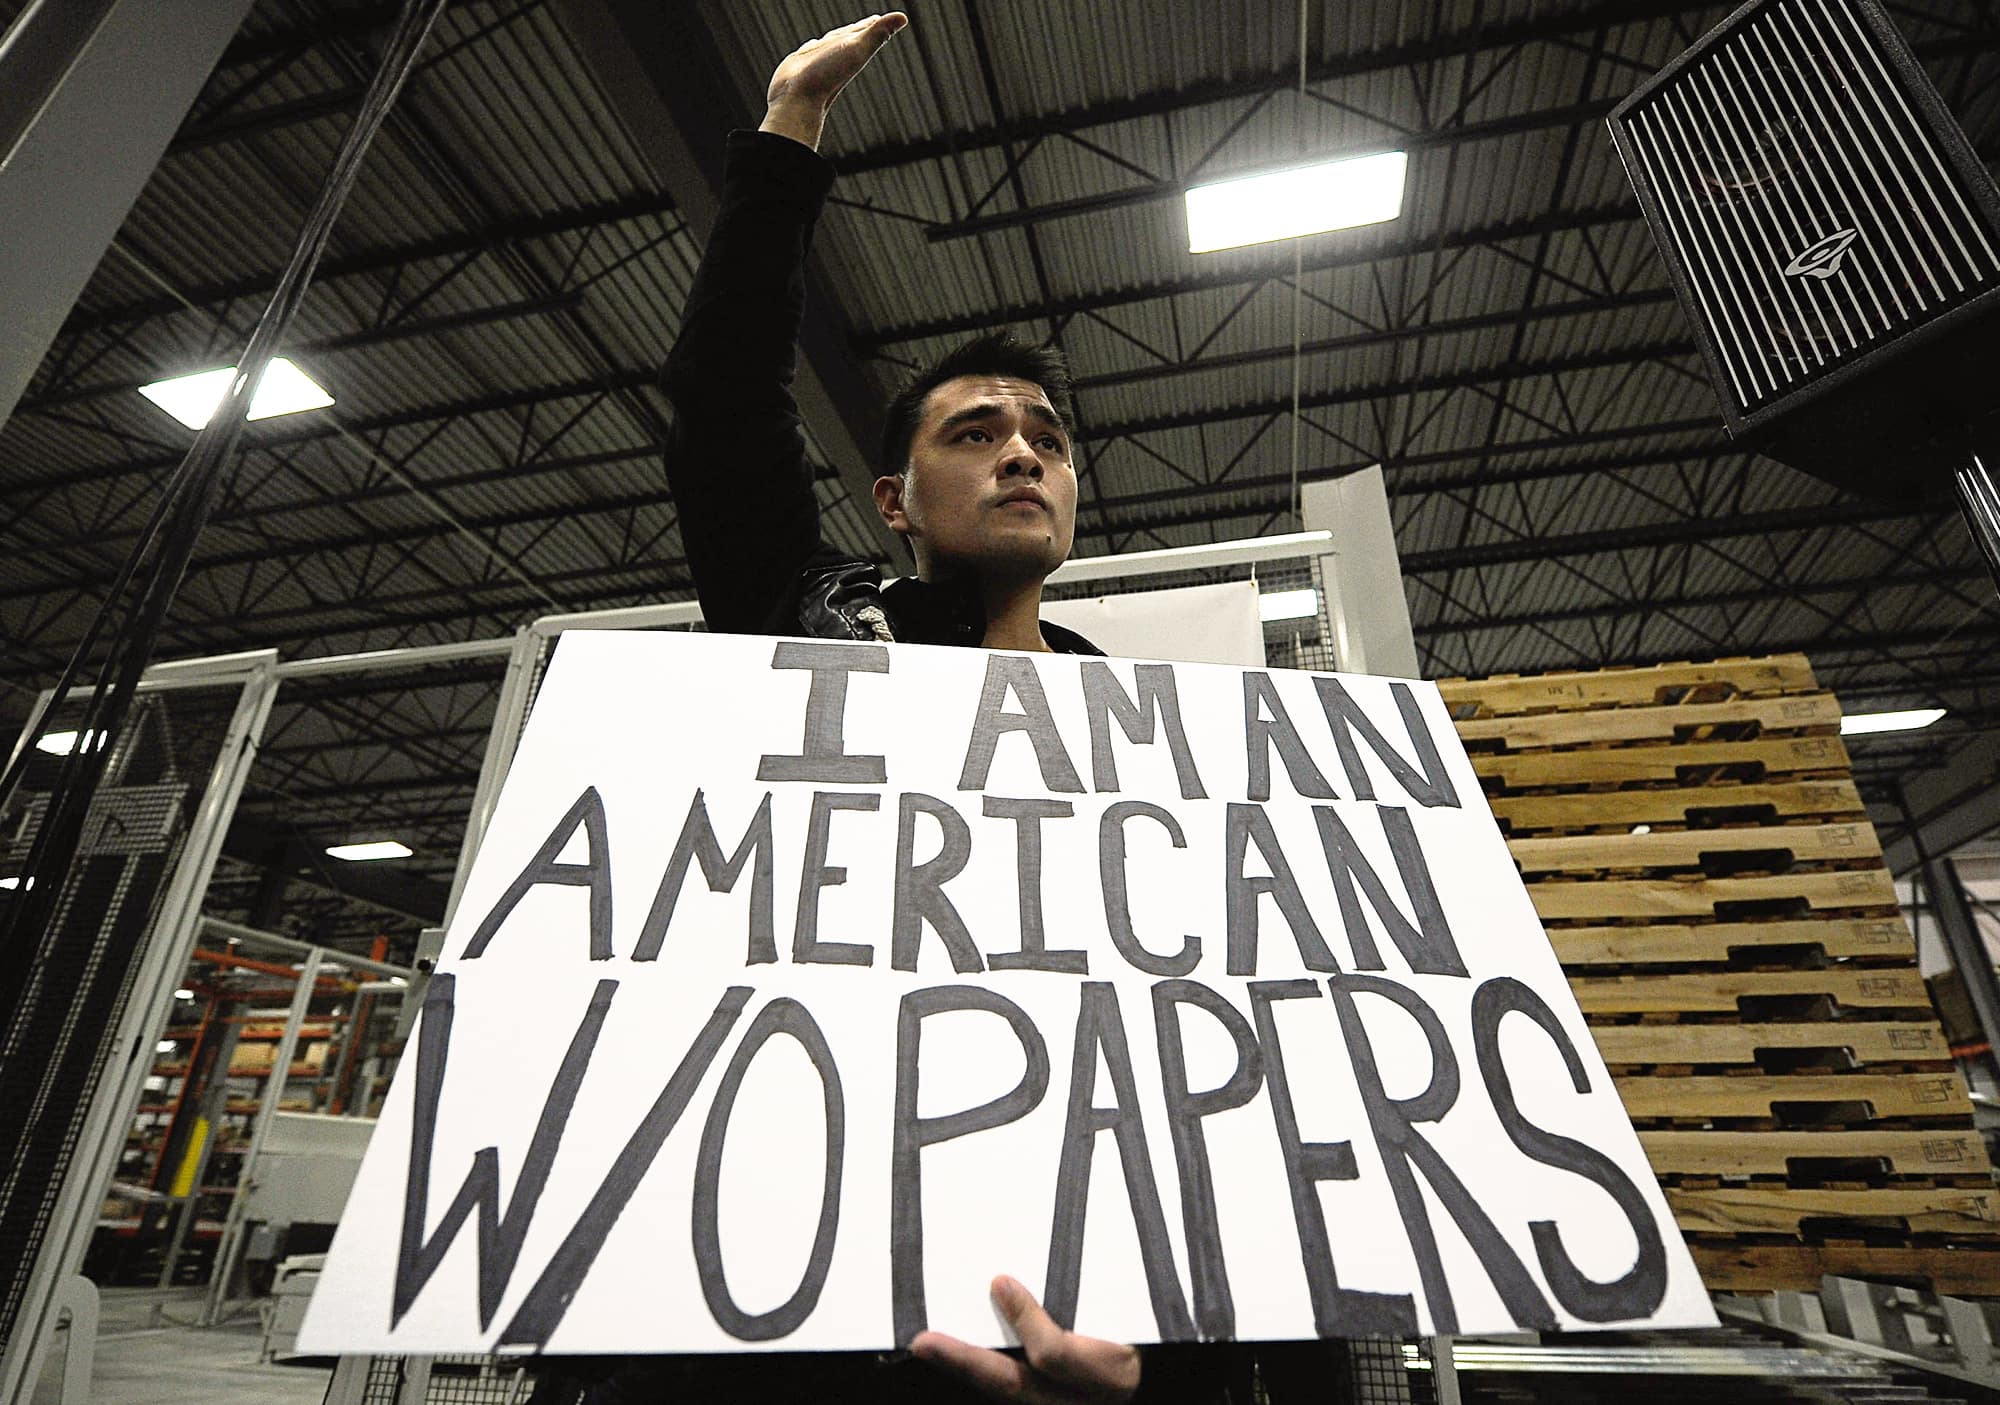 A person raises their right hand and holds a sign that reads